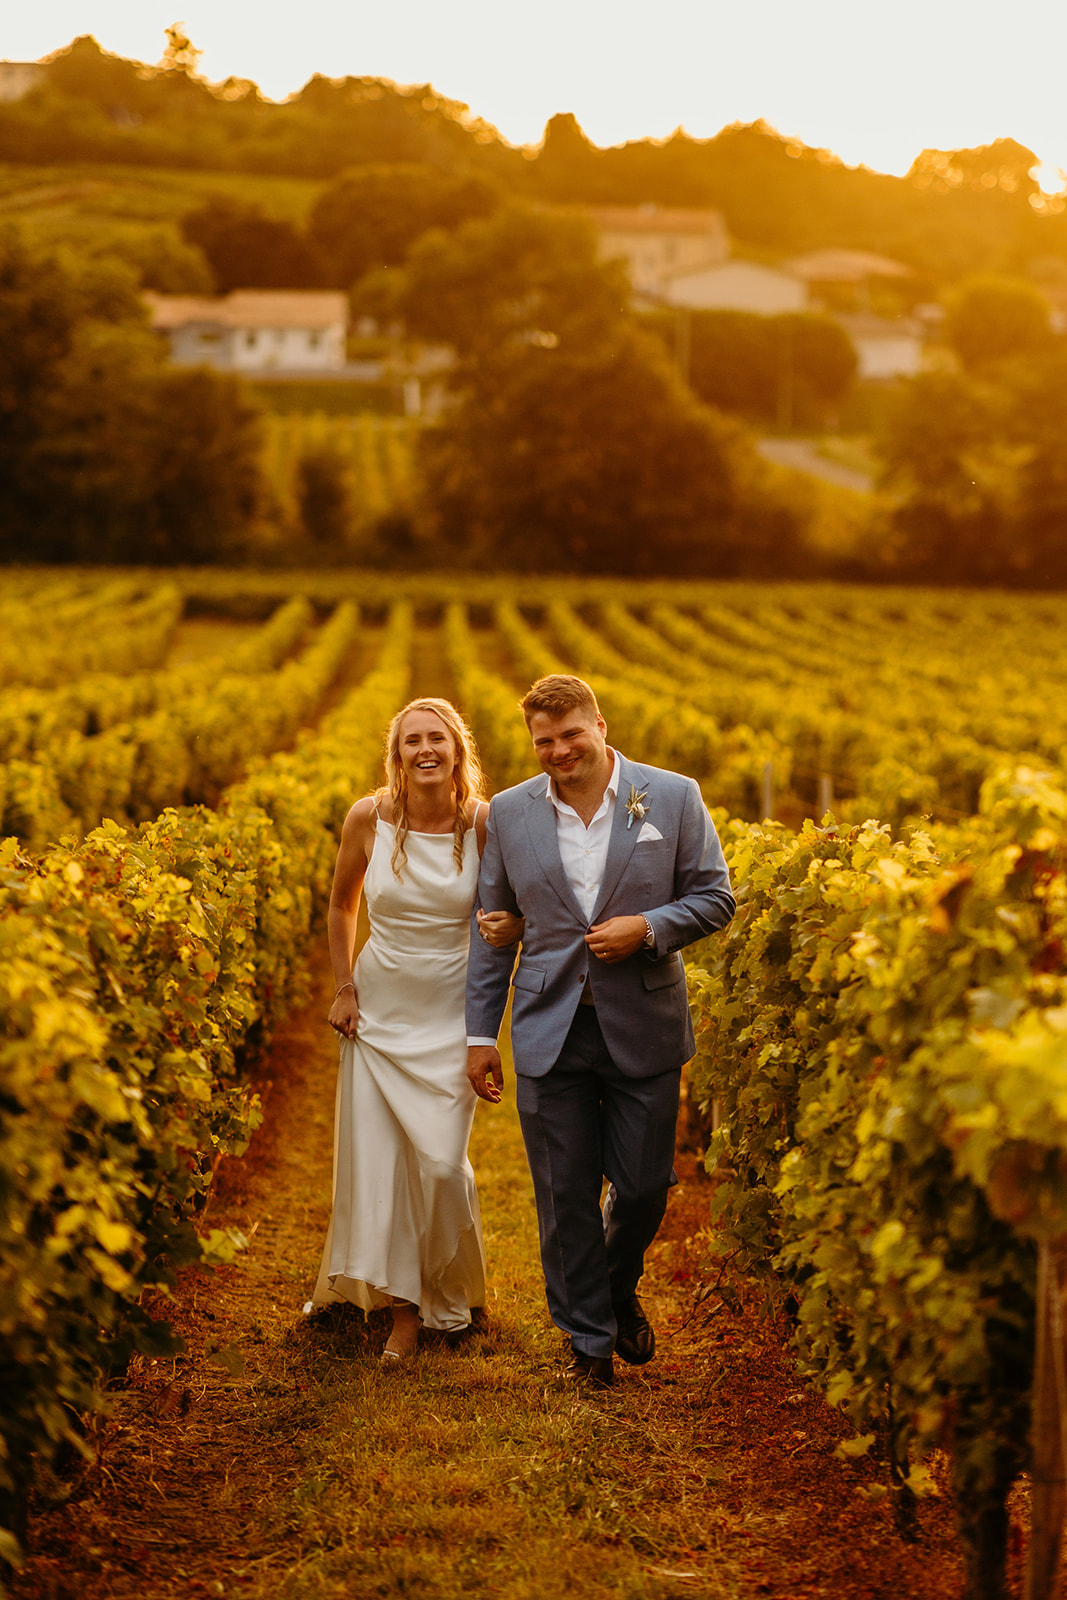 Bride and groom walk down vineyard as the setting sun provides a warm glow